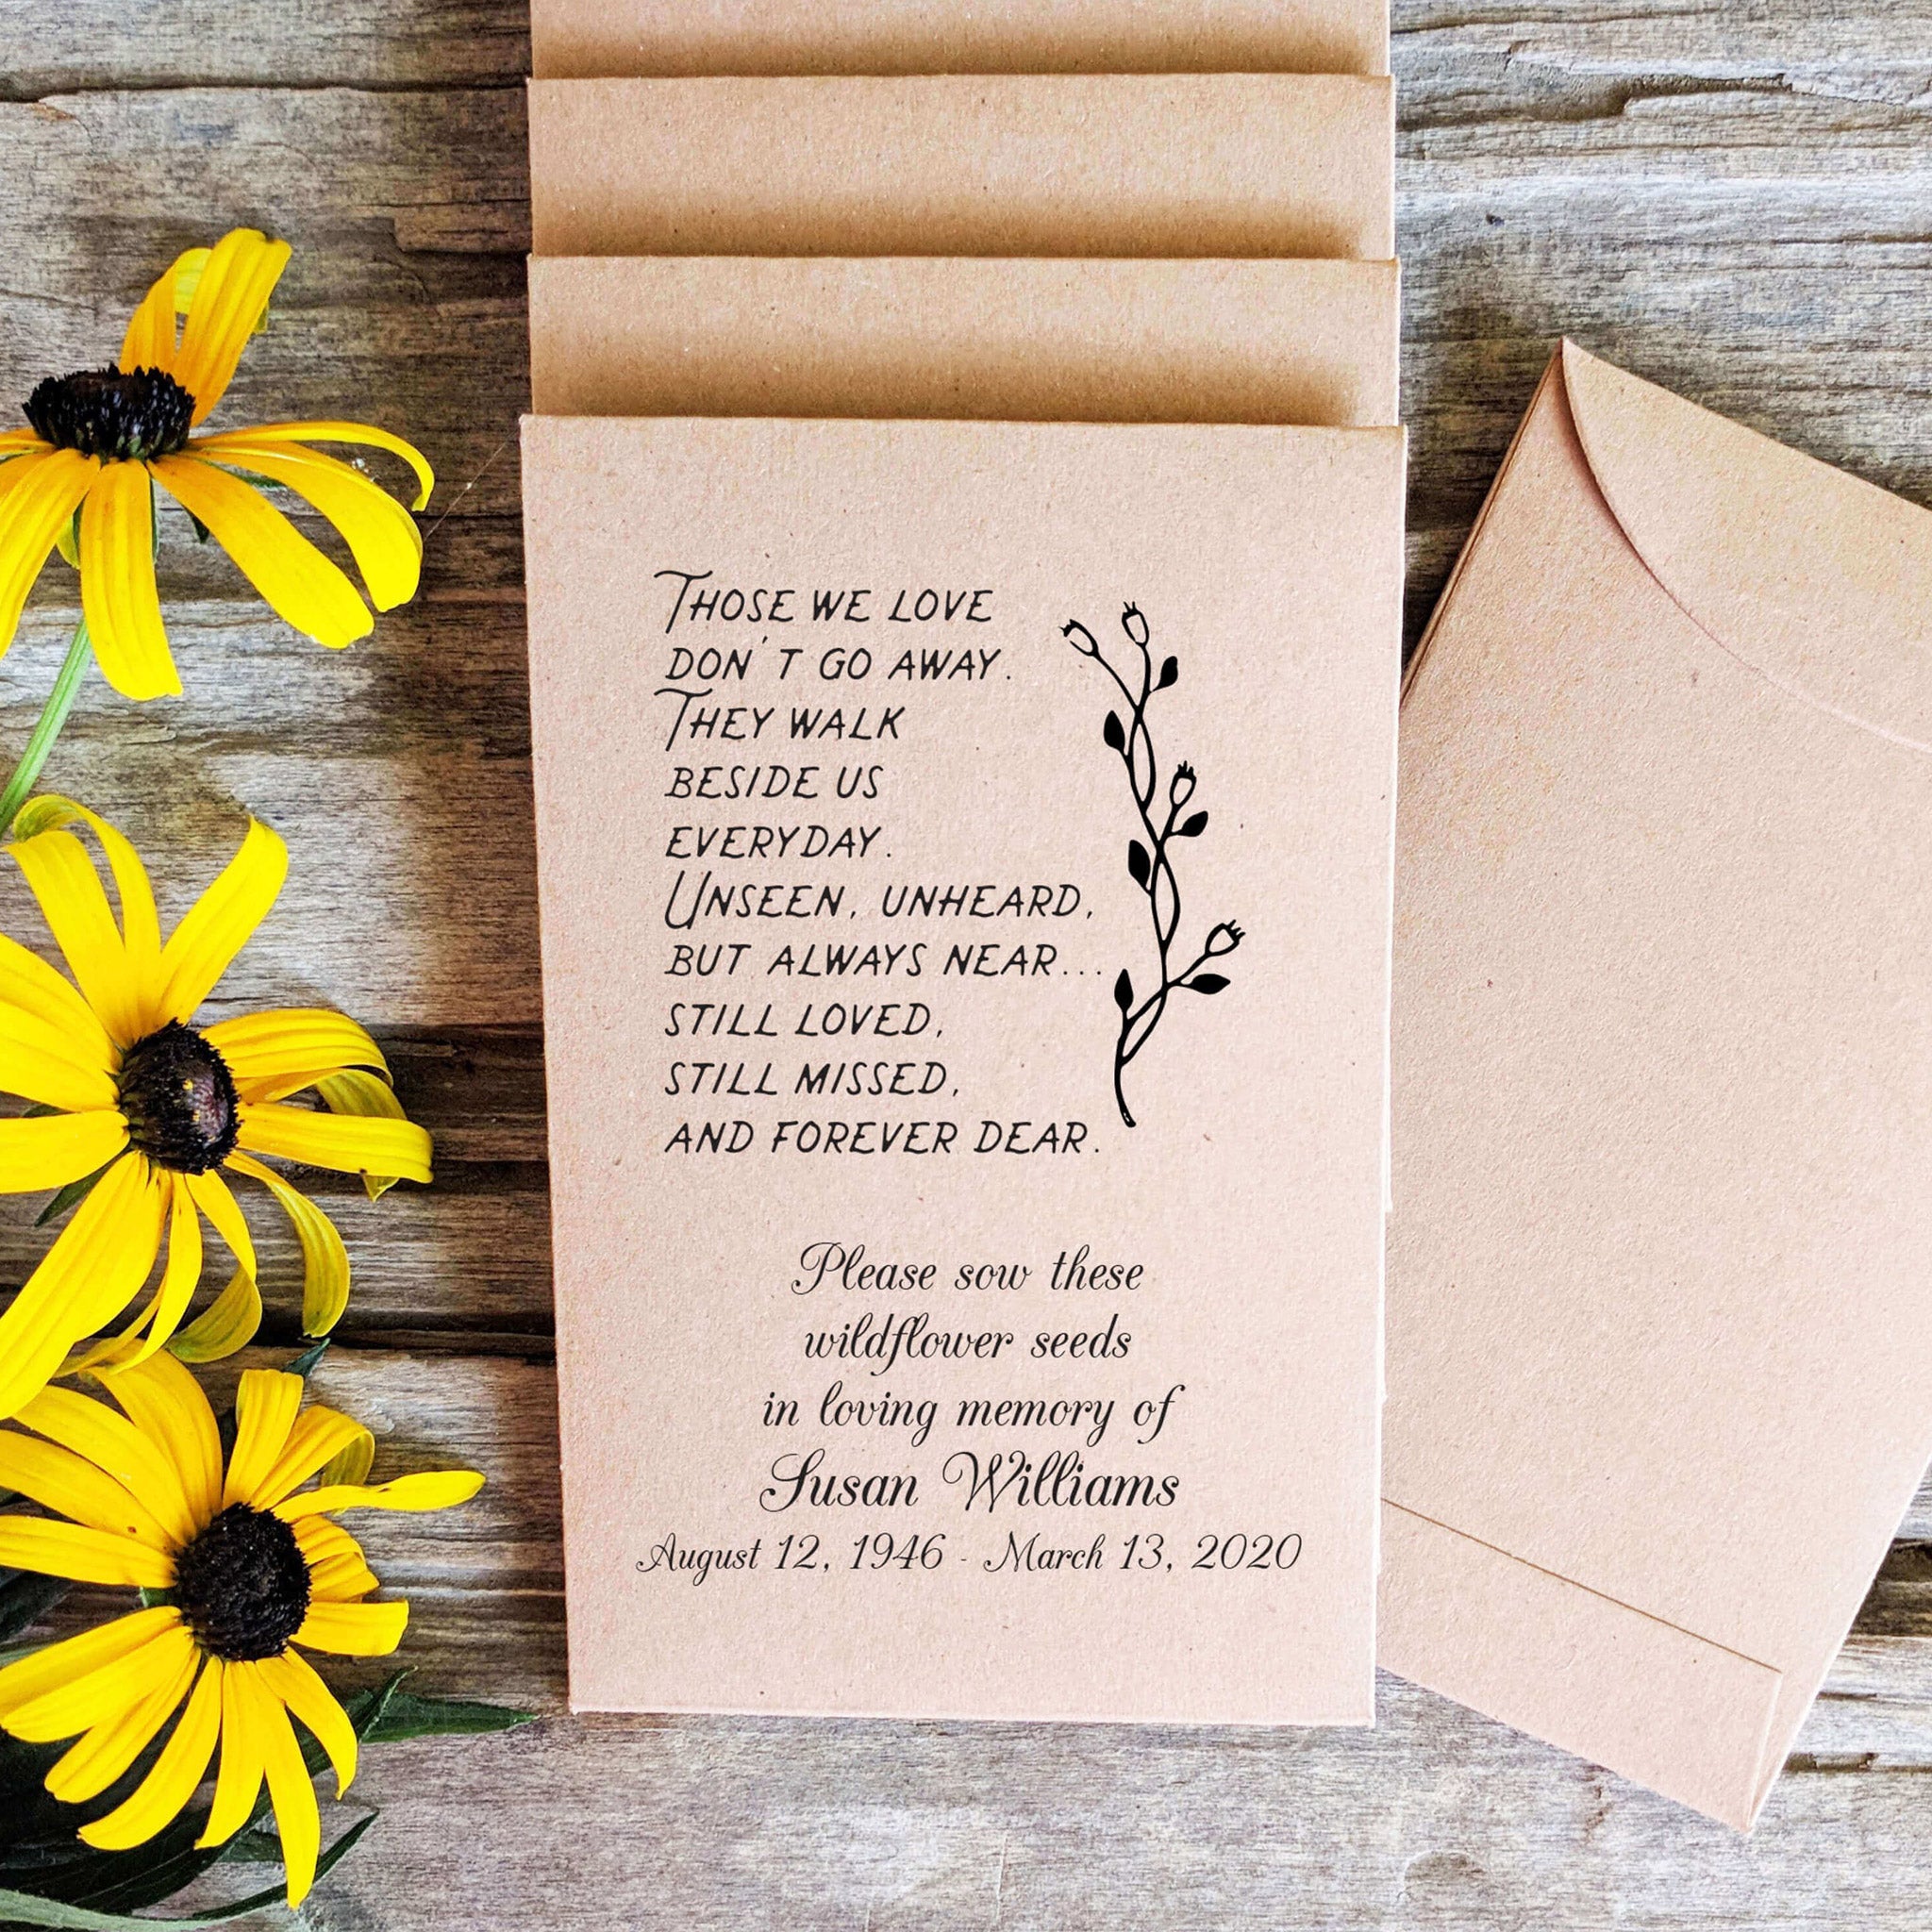 Celebration of Life Seed Packet Favors for Guests - Those We Love Don